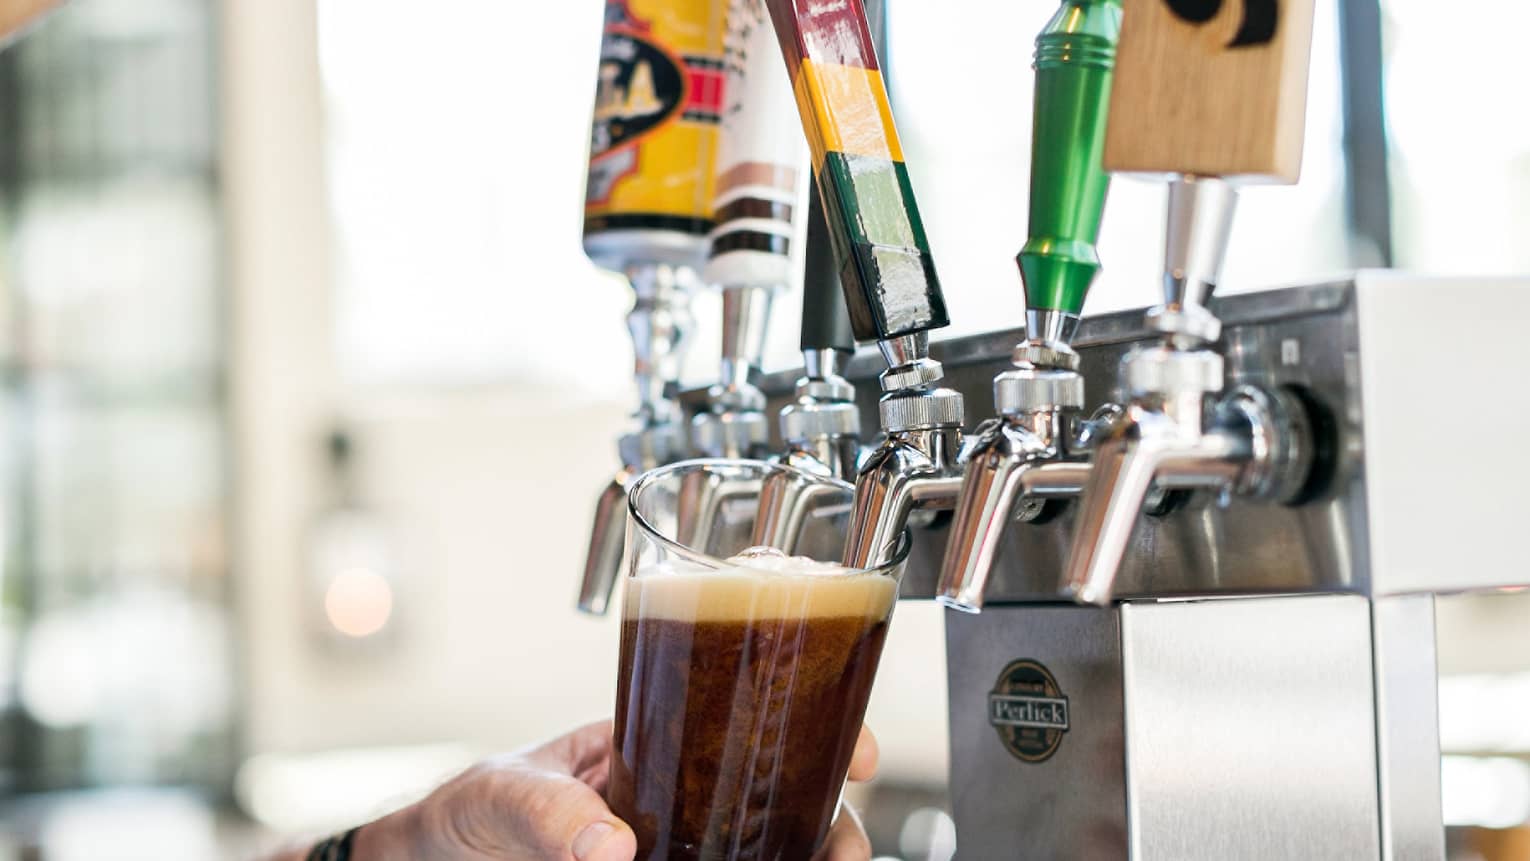 A draft beer being poured into a glass.